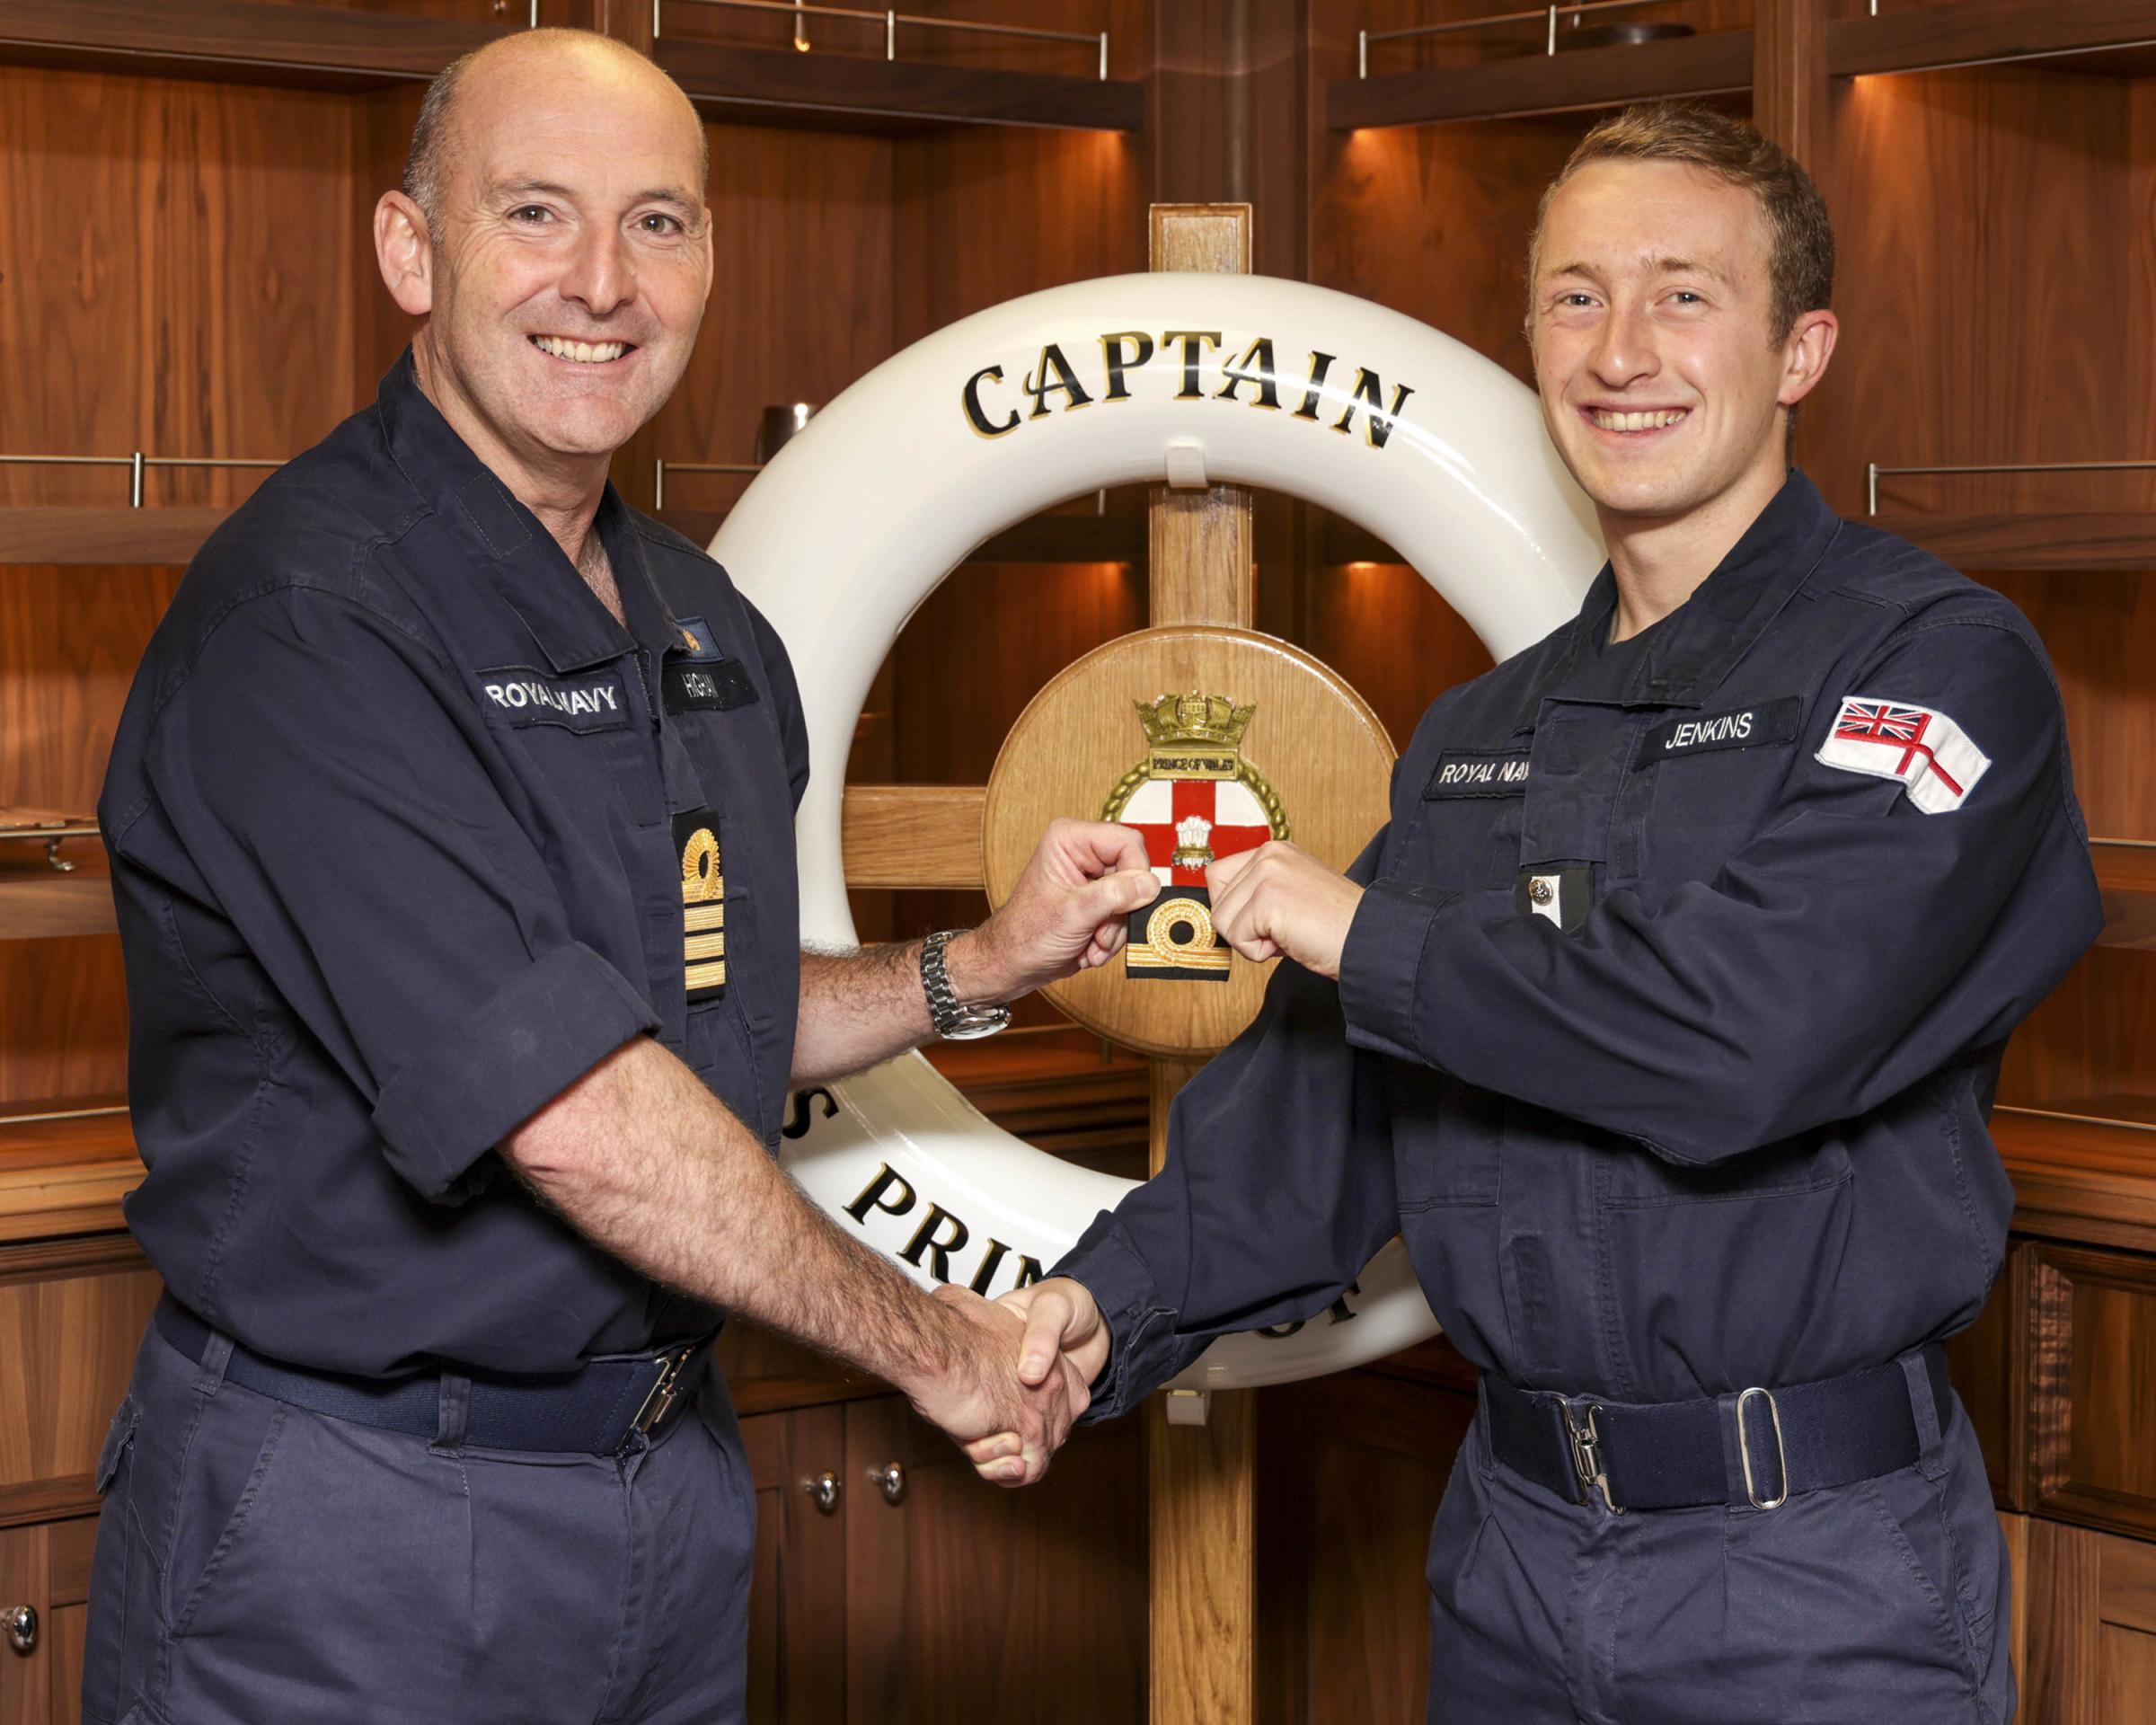 Pictured: SLt Daniel Jenkins gains promotion in a presentation from Captain Stephen Higham OBE RN on board HMS prince of Wales. HMS Prince of Wales - Promotion Board Presentations. HMS Prince of Wales is at sea with embarked F35 Lightning jets from 207